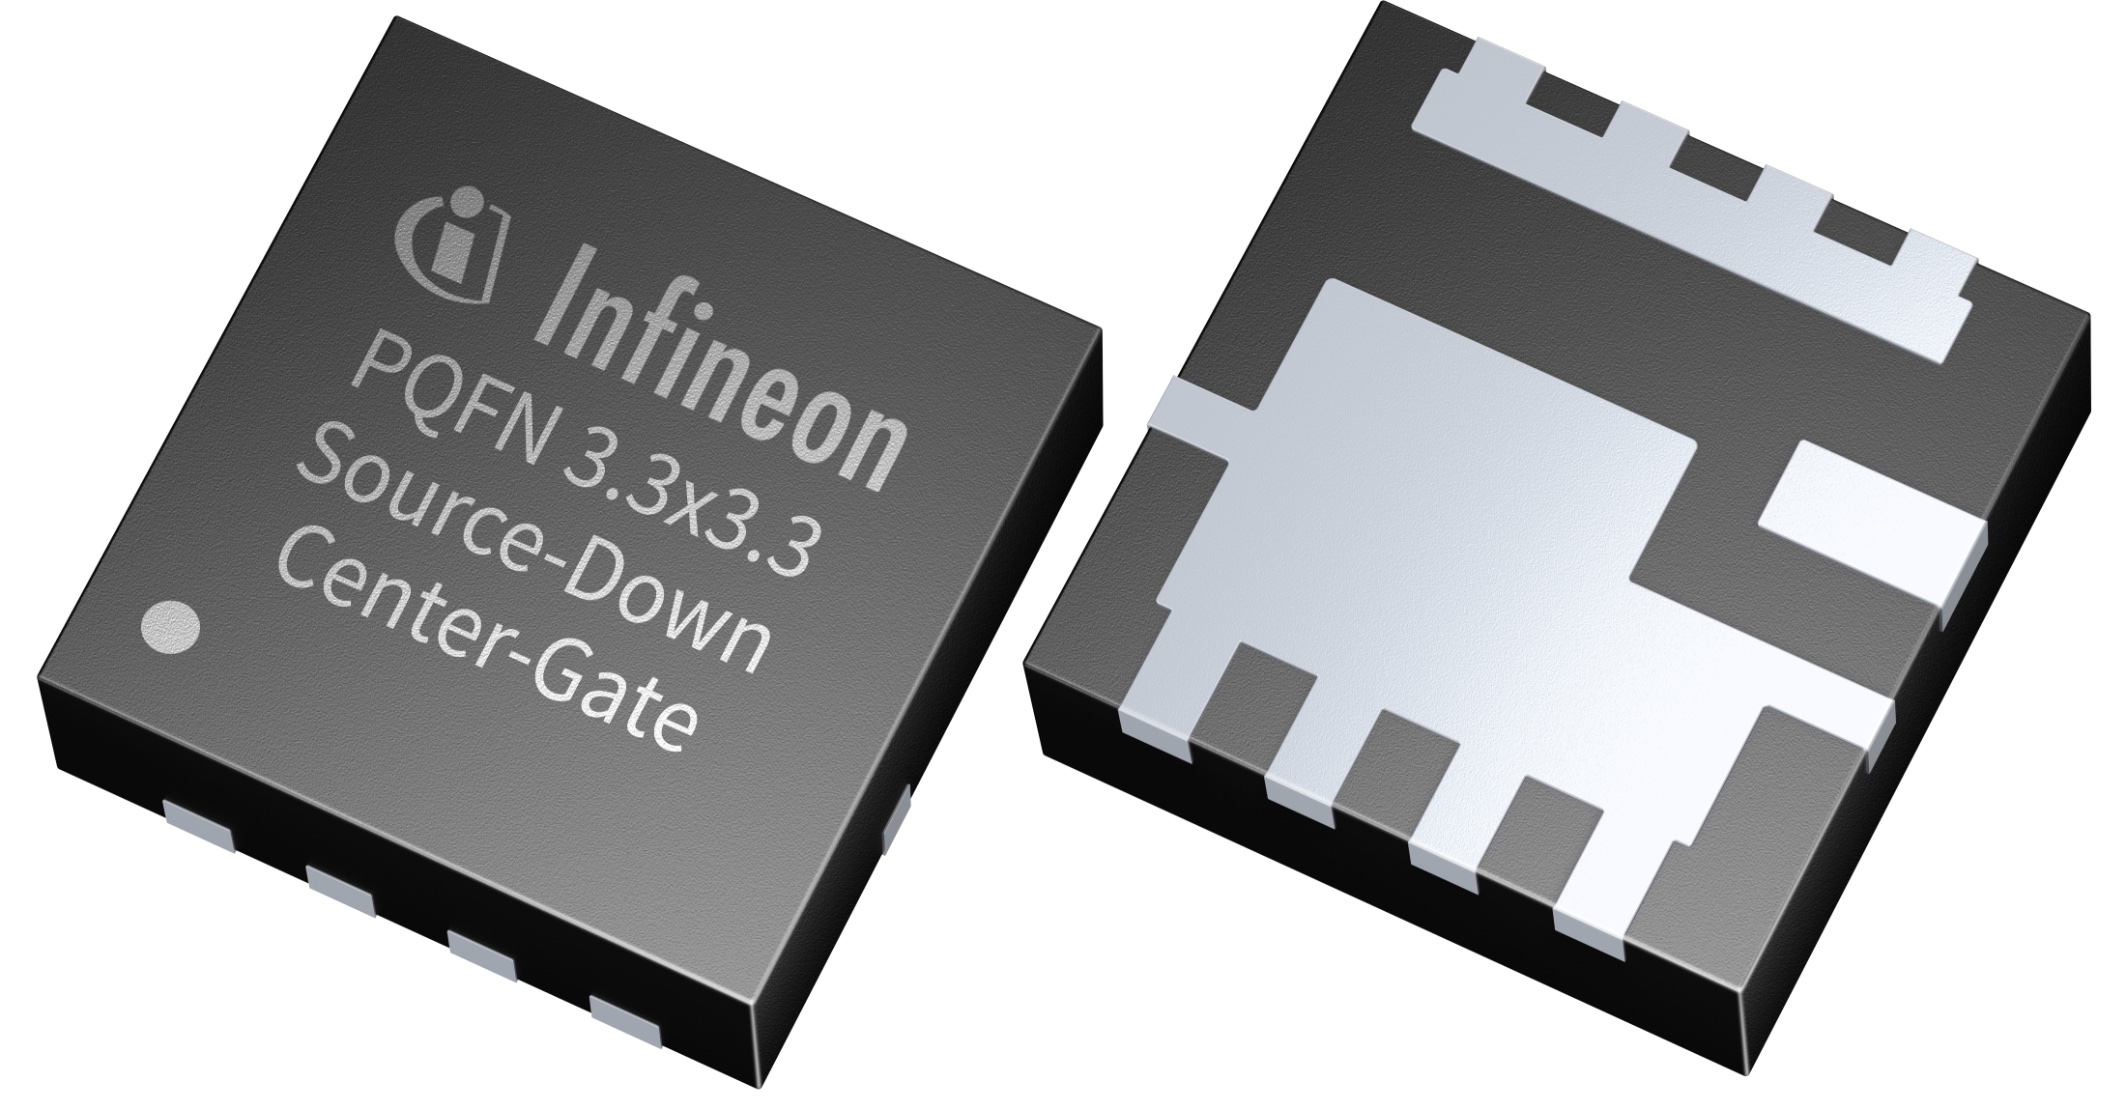 Infineon Adds 40 V Device to its Power MOSFET Family